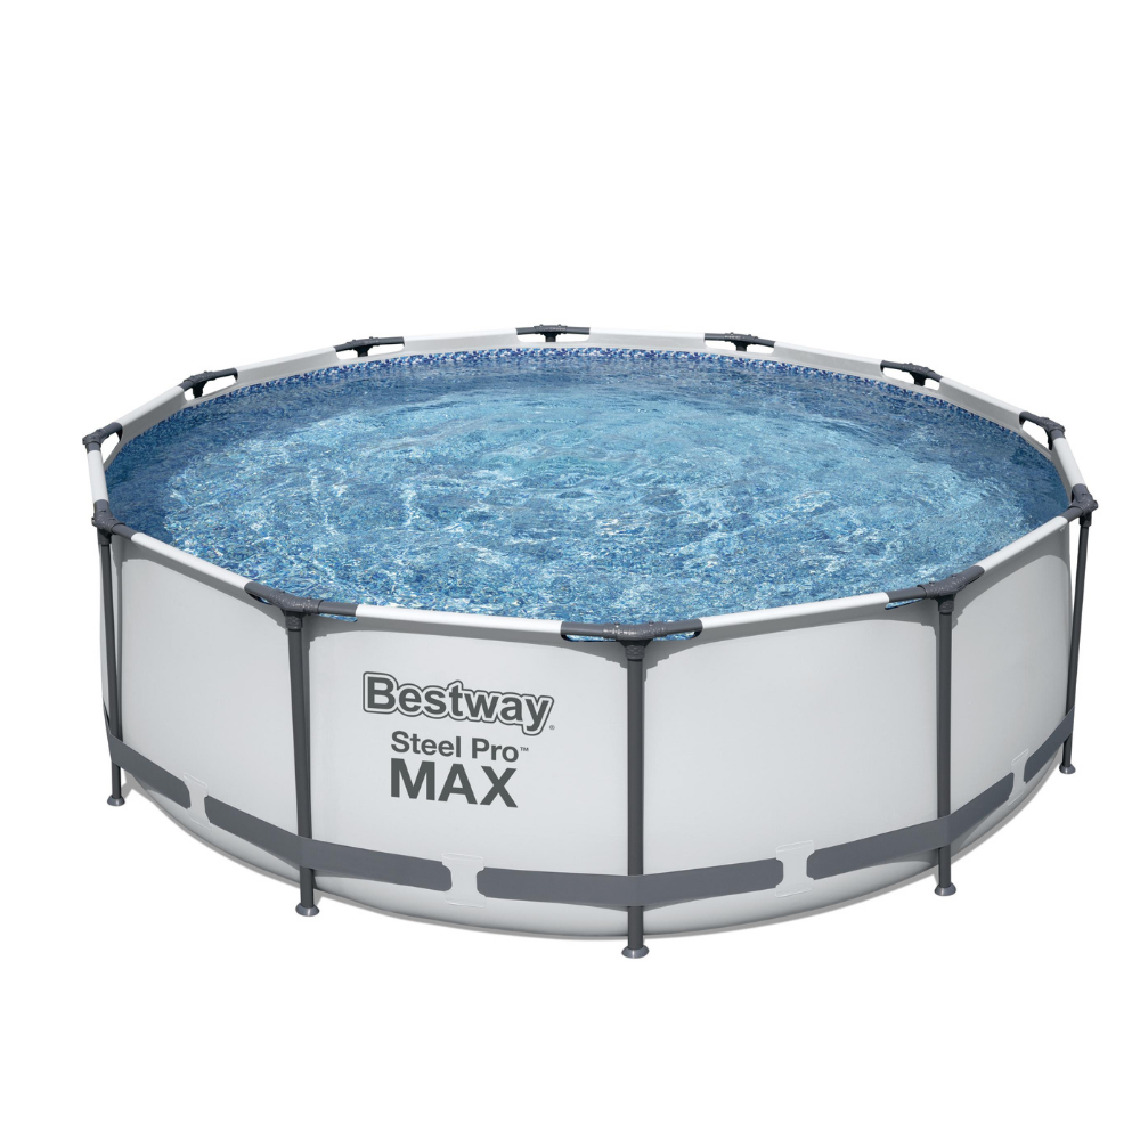 Provence Outillage - Piscines - BESTWAY Piscine hors sol ronde Steel Pro Max 366 x 100 (White) - Piscine Tubulaire